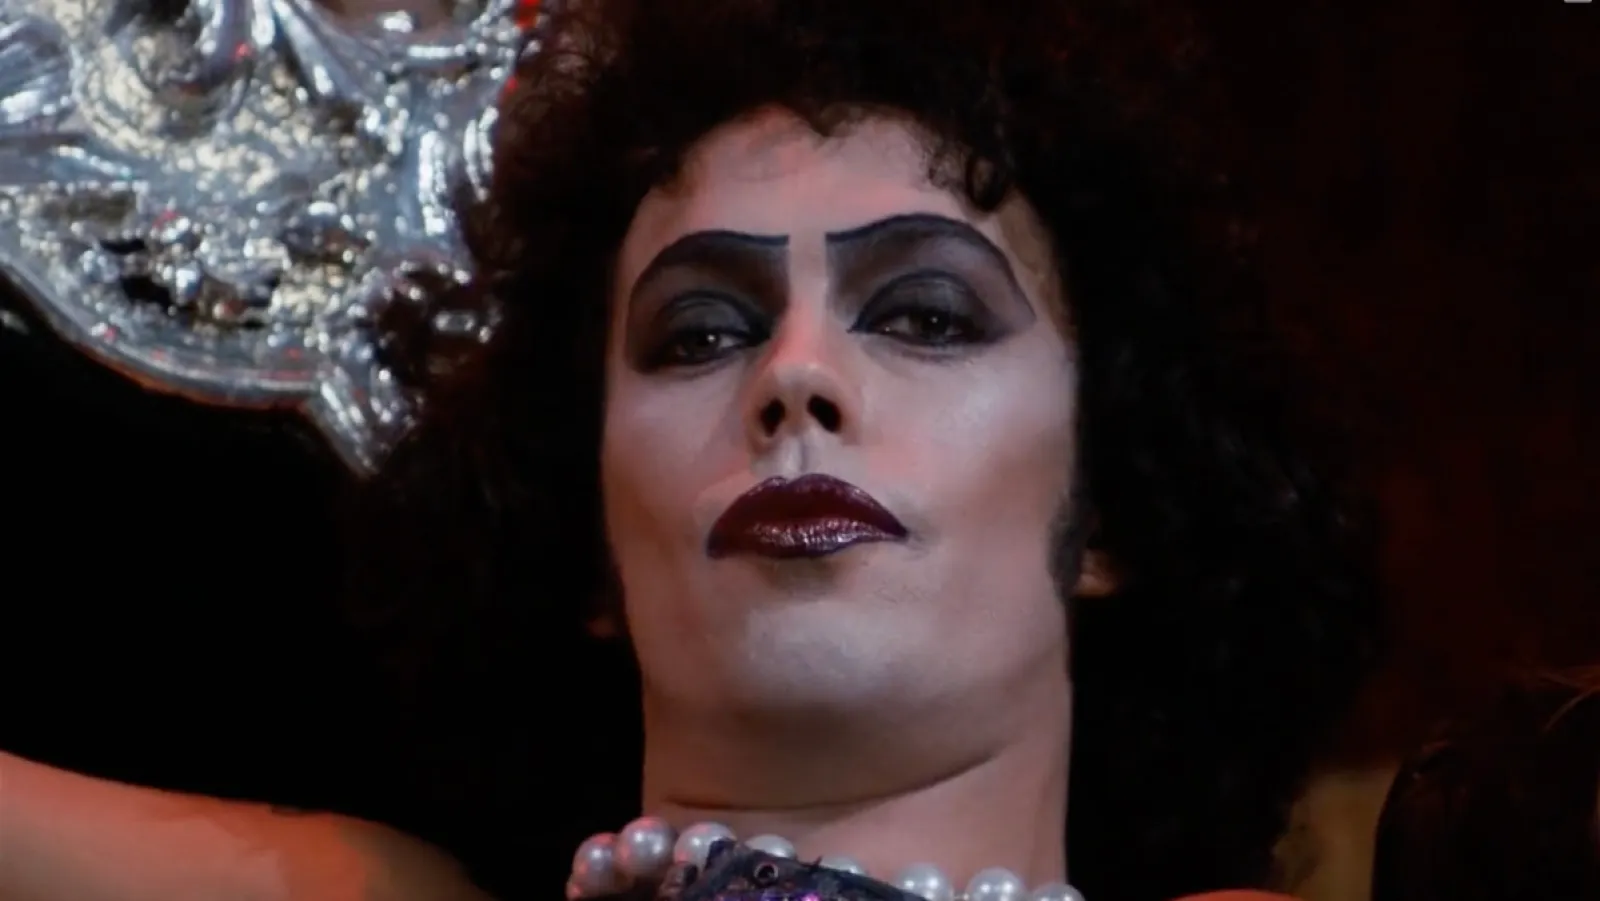 Frank-N-Furter (Tim Curry) being a baddie in 'The Rocky Horror Picture Show'